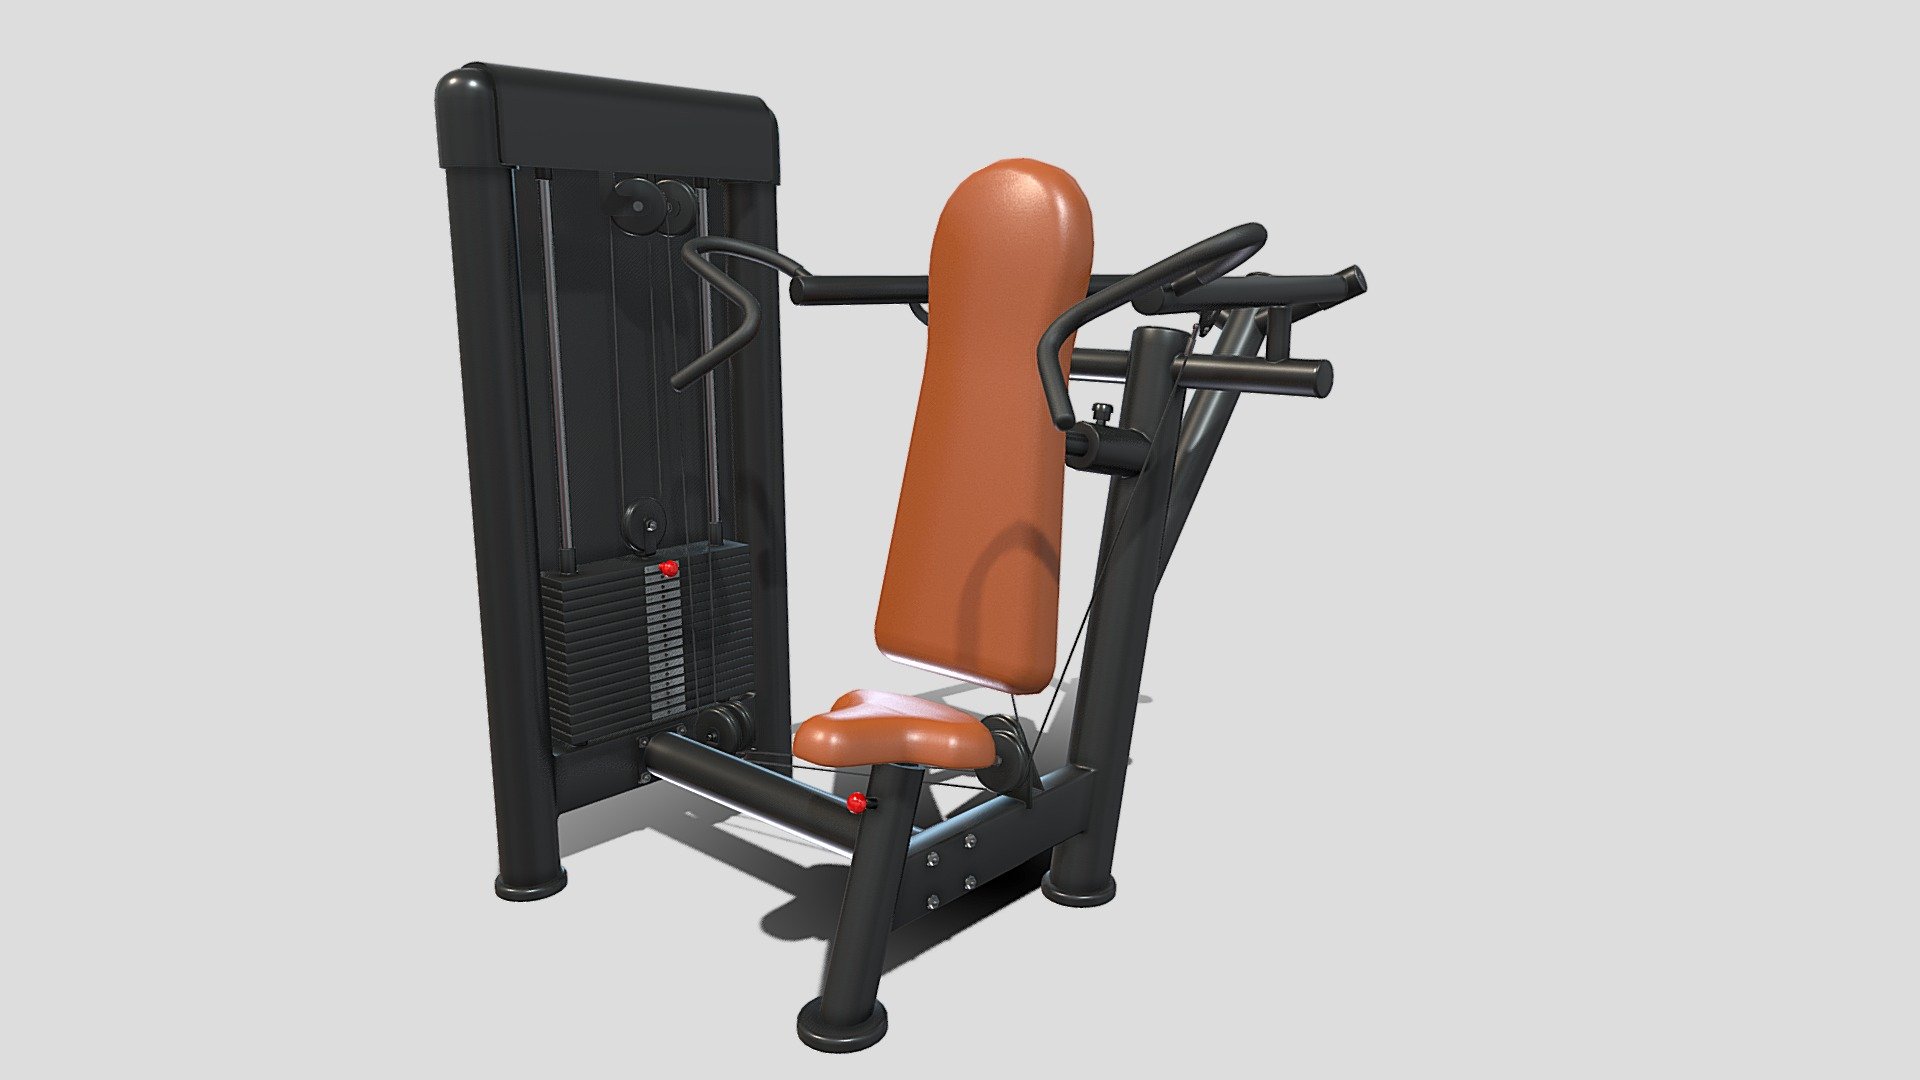 Gym machine 3d model built to real size, rendered with Cycles in Blender, as per seen on attached images. 

File formats:
-.blend, rendered with cycles, as seen in the images;
-.obj, with materials applied;
-.dae, with materials applied;
-.fbx, with materials applied;
-.stl;

Files come named appropriately and split by file format.

3D Software:
The 3D model was originally created in Blender 3.1 and rendered with Cycles.

Materials and textures:
The models have materials applied in all formats, and are ready to import and render.
Materials are image based using PBR, the model comes with five 4k png image textures.

Preview scenes:
The preview images are rendered in Blender using its built-in render engine &lsquo;Cycles'.
Note that the blend files come directly with the rendering scene included and the render command will generate the exact result as seen in previews.

General:
The models are built mostly out of quads.

For any problems please feel free to contact me.

Don't forget to rate and enjoy! - Deltoid press machine - Buy Royalty Free 3D model by dragosburian 3d model